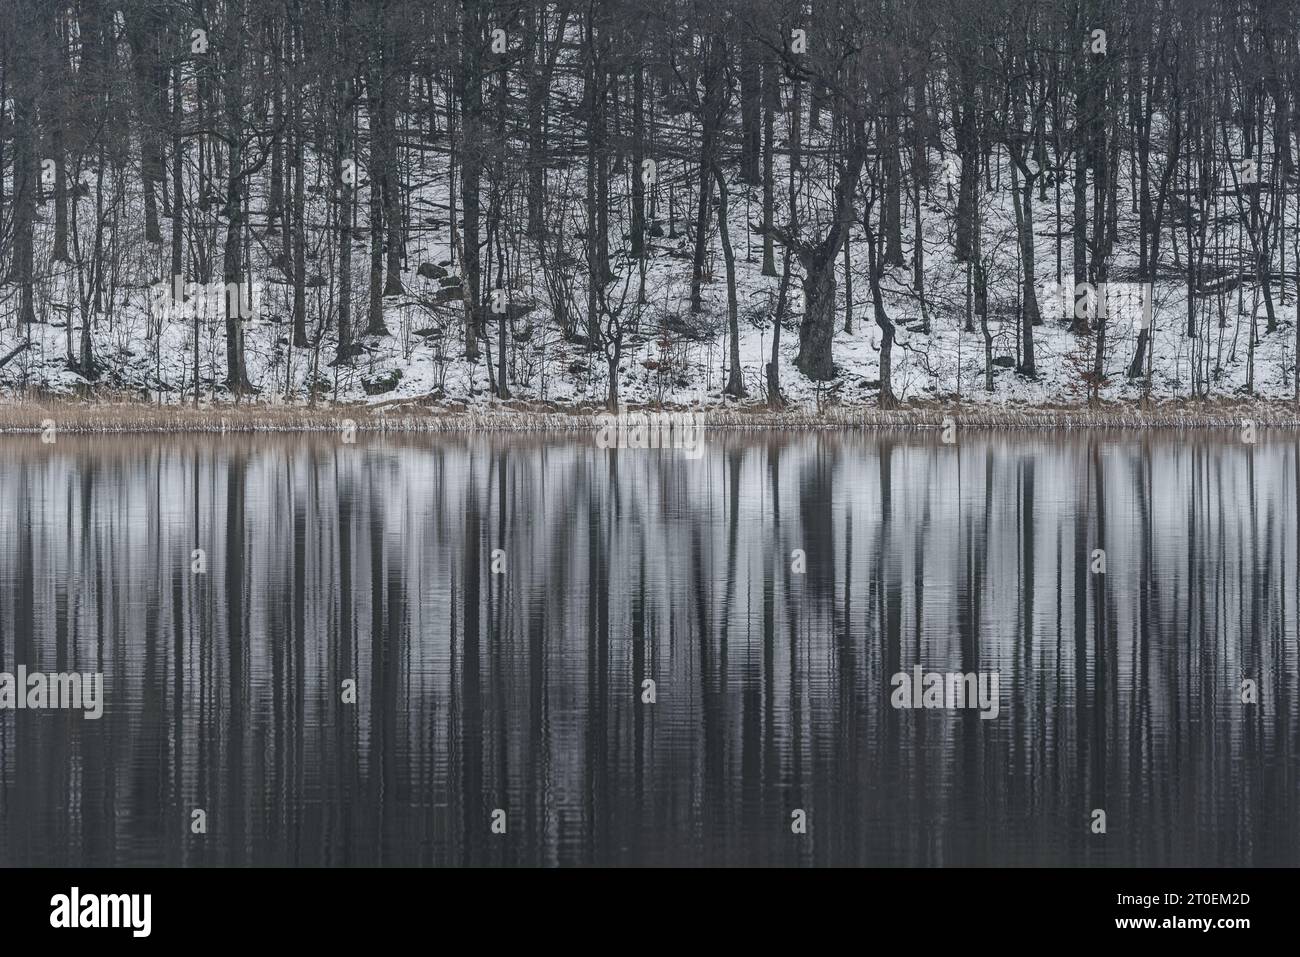 Winter tranquility in a snowy Swedish landscape with trees reflected on a calm lake. Stock Photo